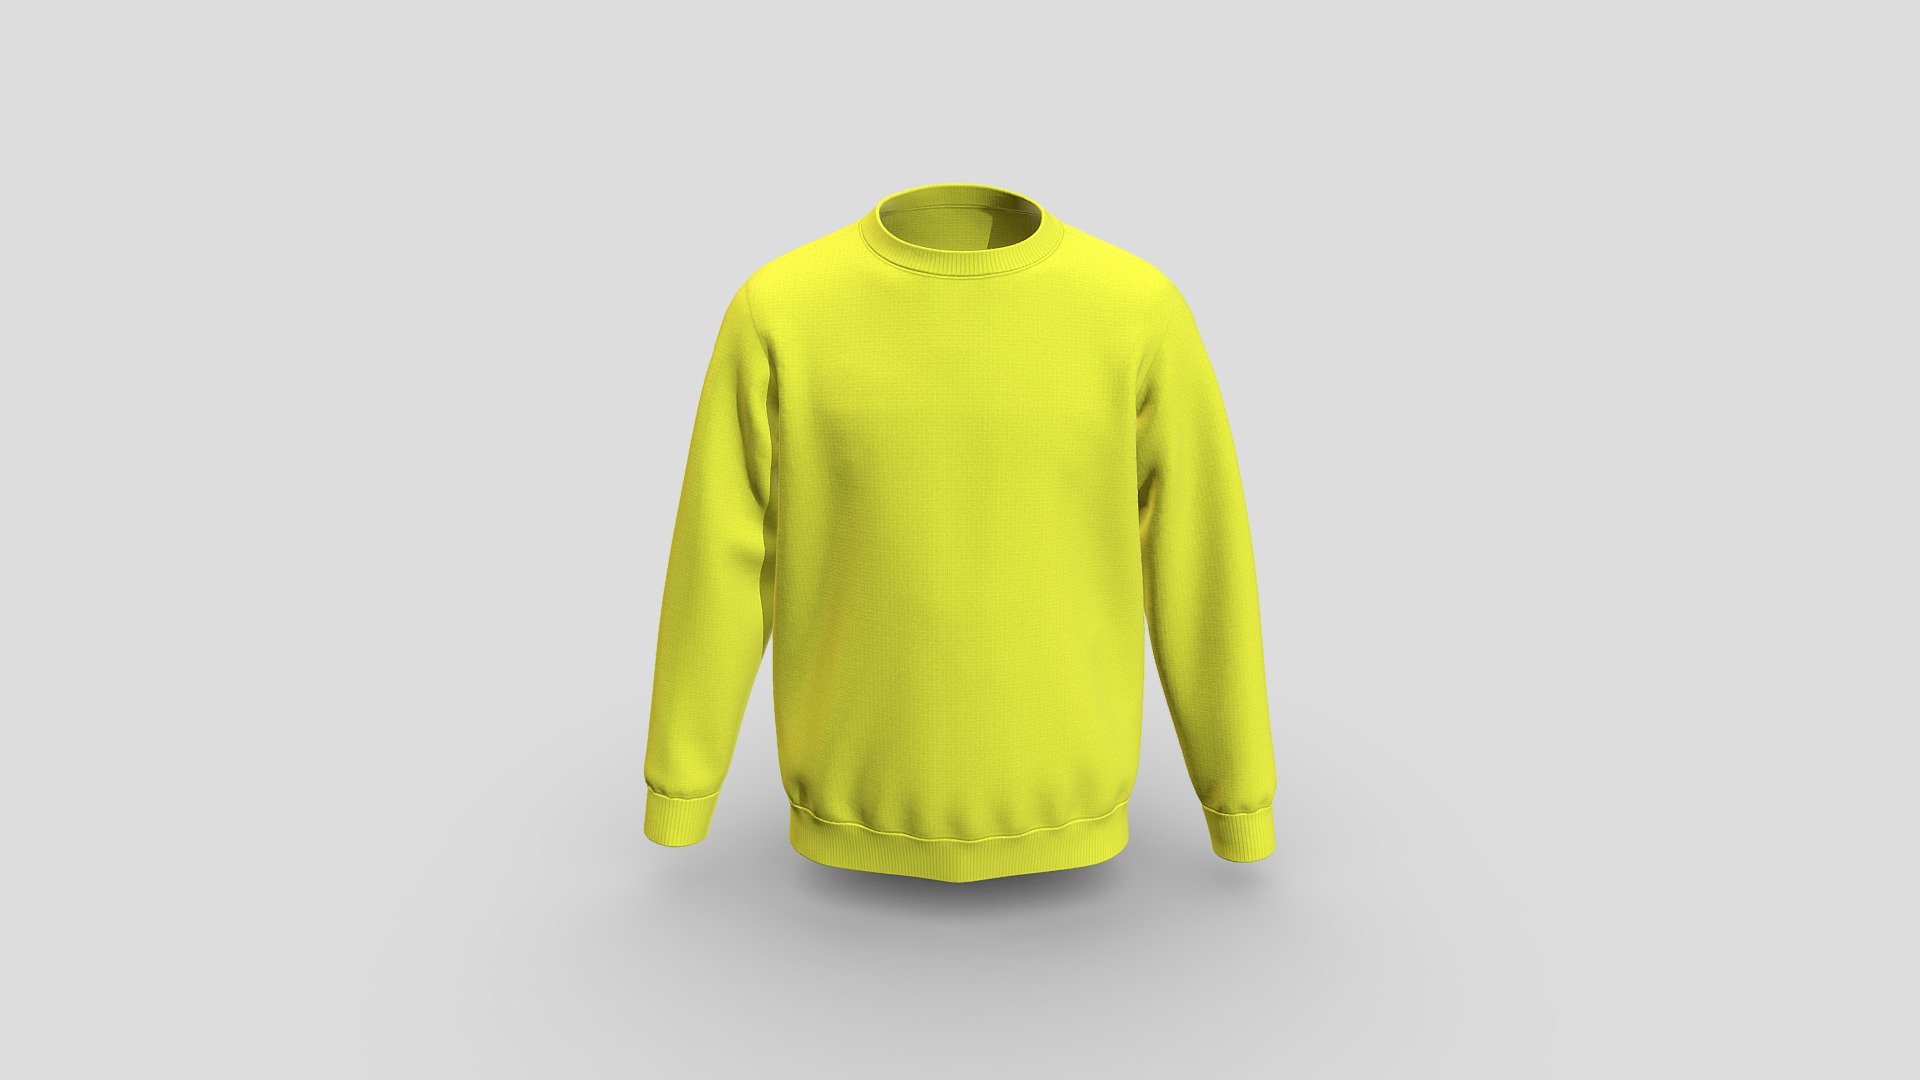 Cloth Title = Premium Relaxed Fit Sweatshirt Design  

SKU = DG100079 

Category = Men 

Product Type = Sweatshirt 

Cloth Length = Regular 

Body Fit = Loose Fit 

Occasion = Outerwear 

Sleeve Style = Set In Sleeve 


Our Services:

3D Apparel Design.

OBJ,FBX,GLTF Making with High/Low Poly.

Fabric Digitalization.

Mockup making.

3D Teck Pack.

Pattern Making.

2D Illustration.

Cloth Animation and 360 Spin Video.


Contact us:- 

Email: info@digitalfashionwear.com 

Website: https://digitalfashionwear.com 


We designed all the types of cloth specially focused on product visualization, e-commerce, fitting, and production. 

We will design: 

T-shirts 

Polo shirts 

Hoodies 

Sweatshirt 

Jackets 

Shirts 

TankTops 

Trousers 

Bras 

Underwear 

Blazer 

Aprons 

Leggings 

and All Fashion items. 





Our goal is to make sure what we provide you, meets your demand 3d model